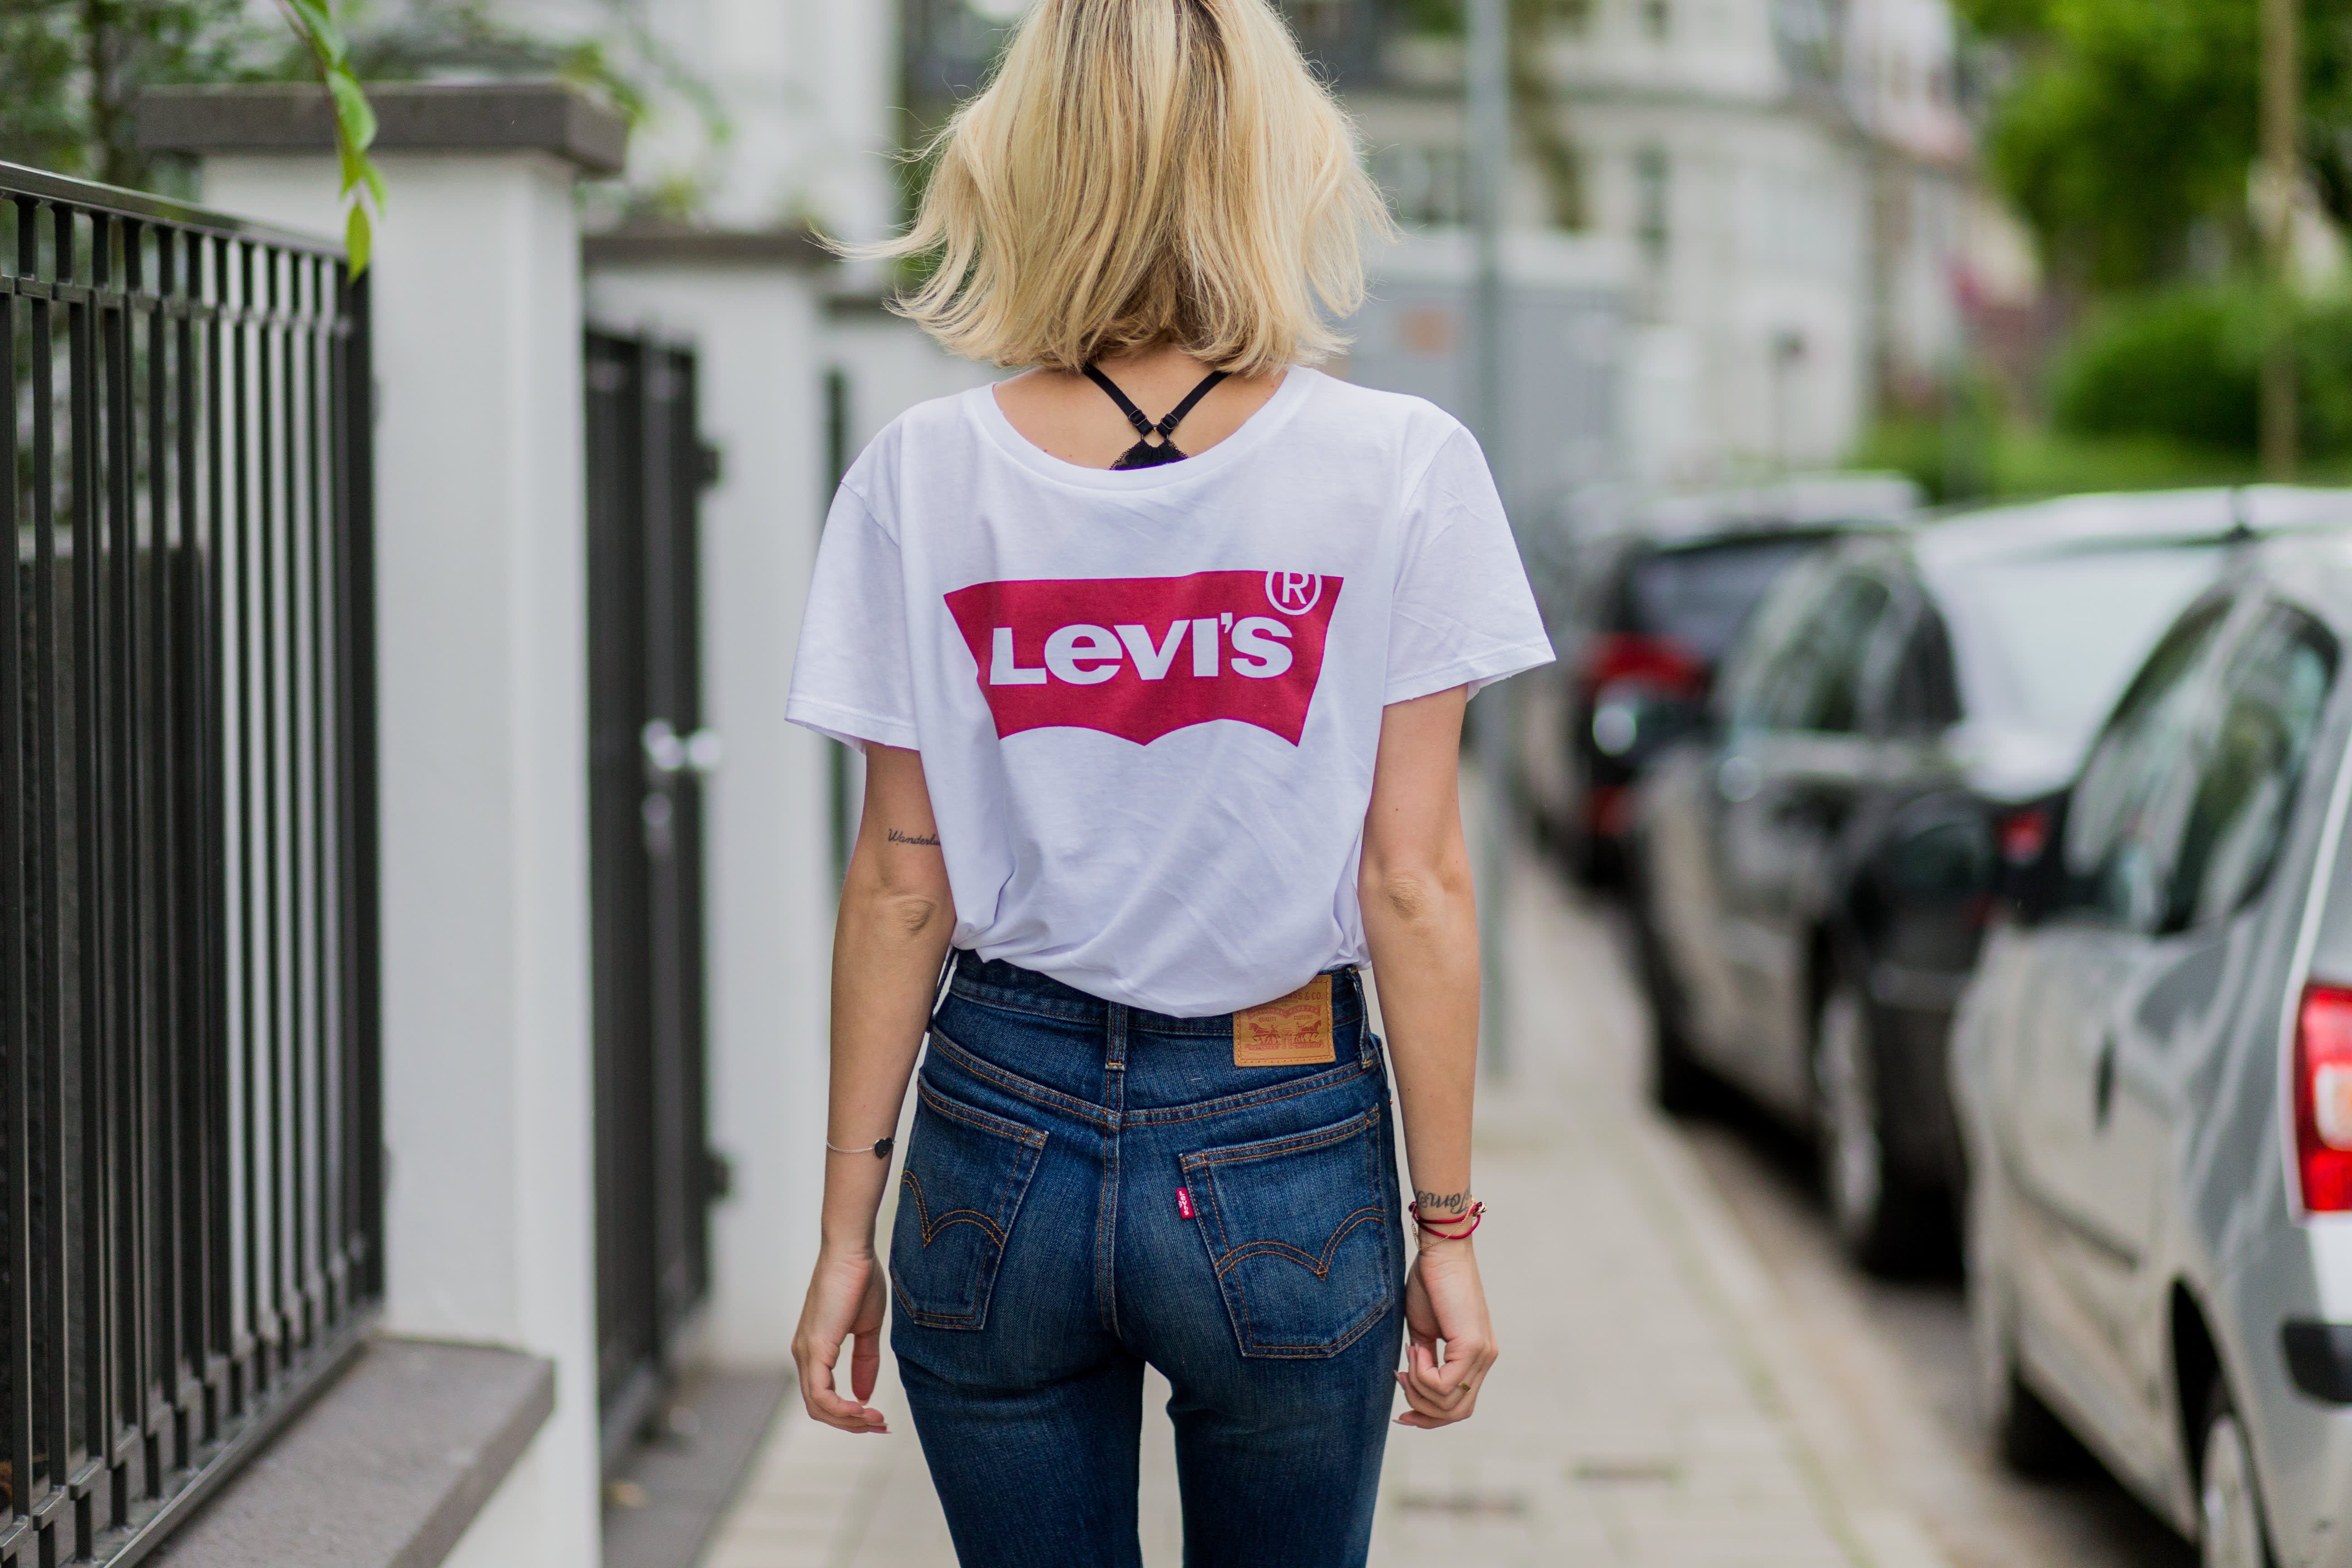 Top 59+ imagen is levi’s publicly traded